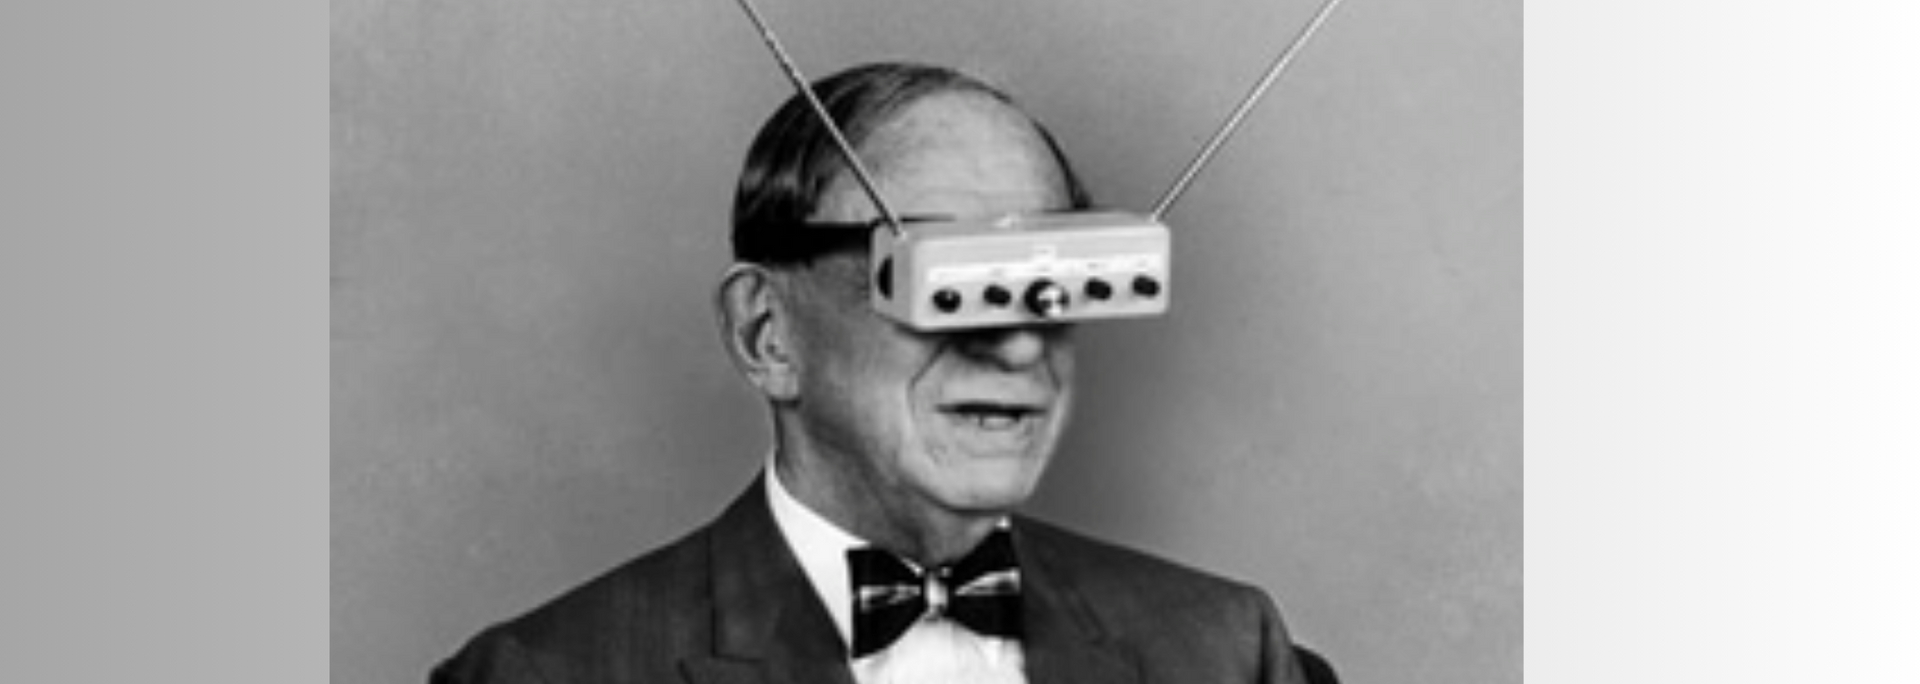 Picture of Gernsback